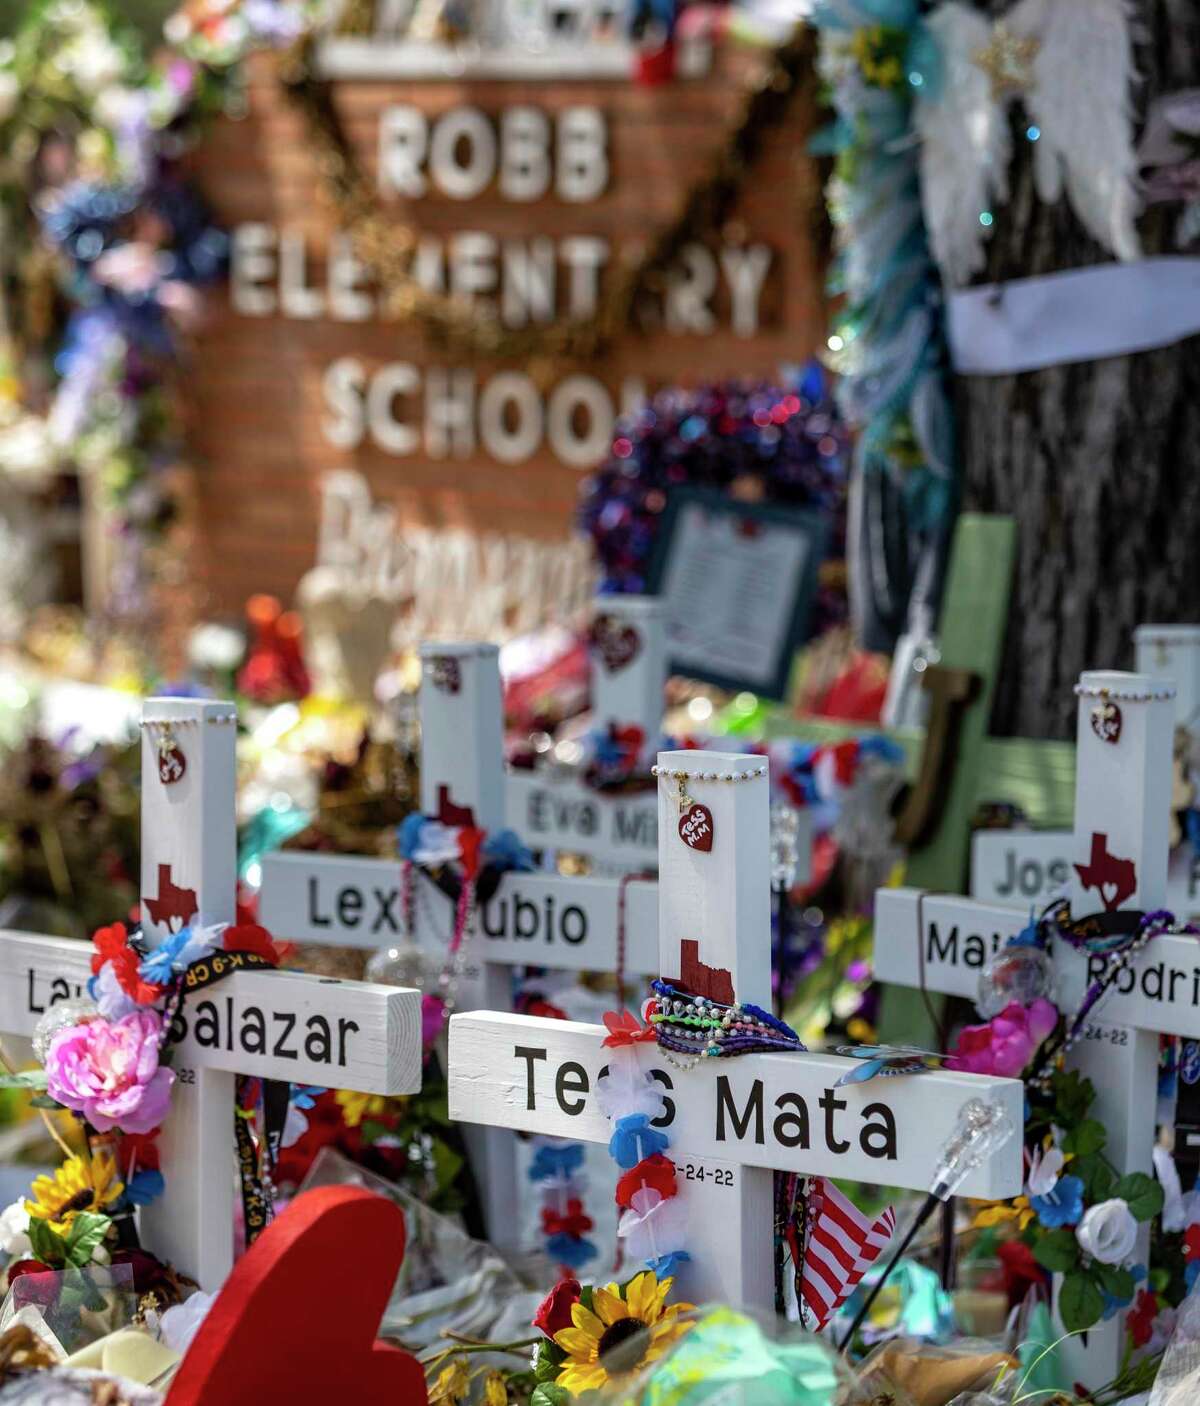 Tess Marie Mata’s cross at Robb Elementary School’s makeshift memorial site is seen Monday, June 13, 2022 in Uvalde. Mata one of 19 children and two adults killed May 24, 2022 at Robb Elementary School in Uvalde by a gunman with an AR 15-style assault rifle, was buried Monday.